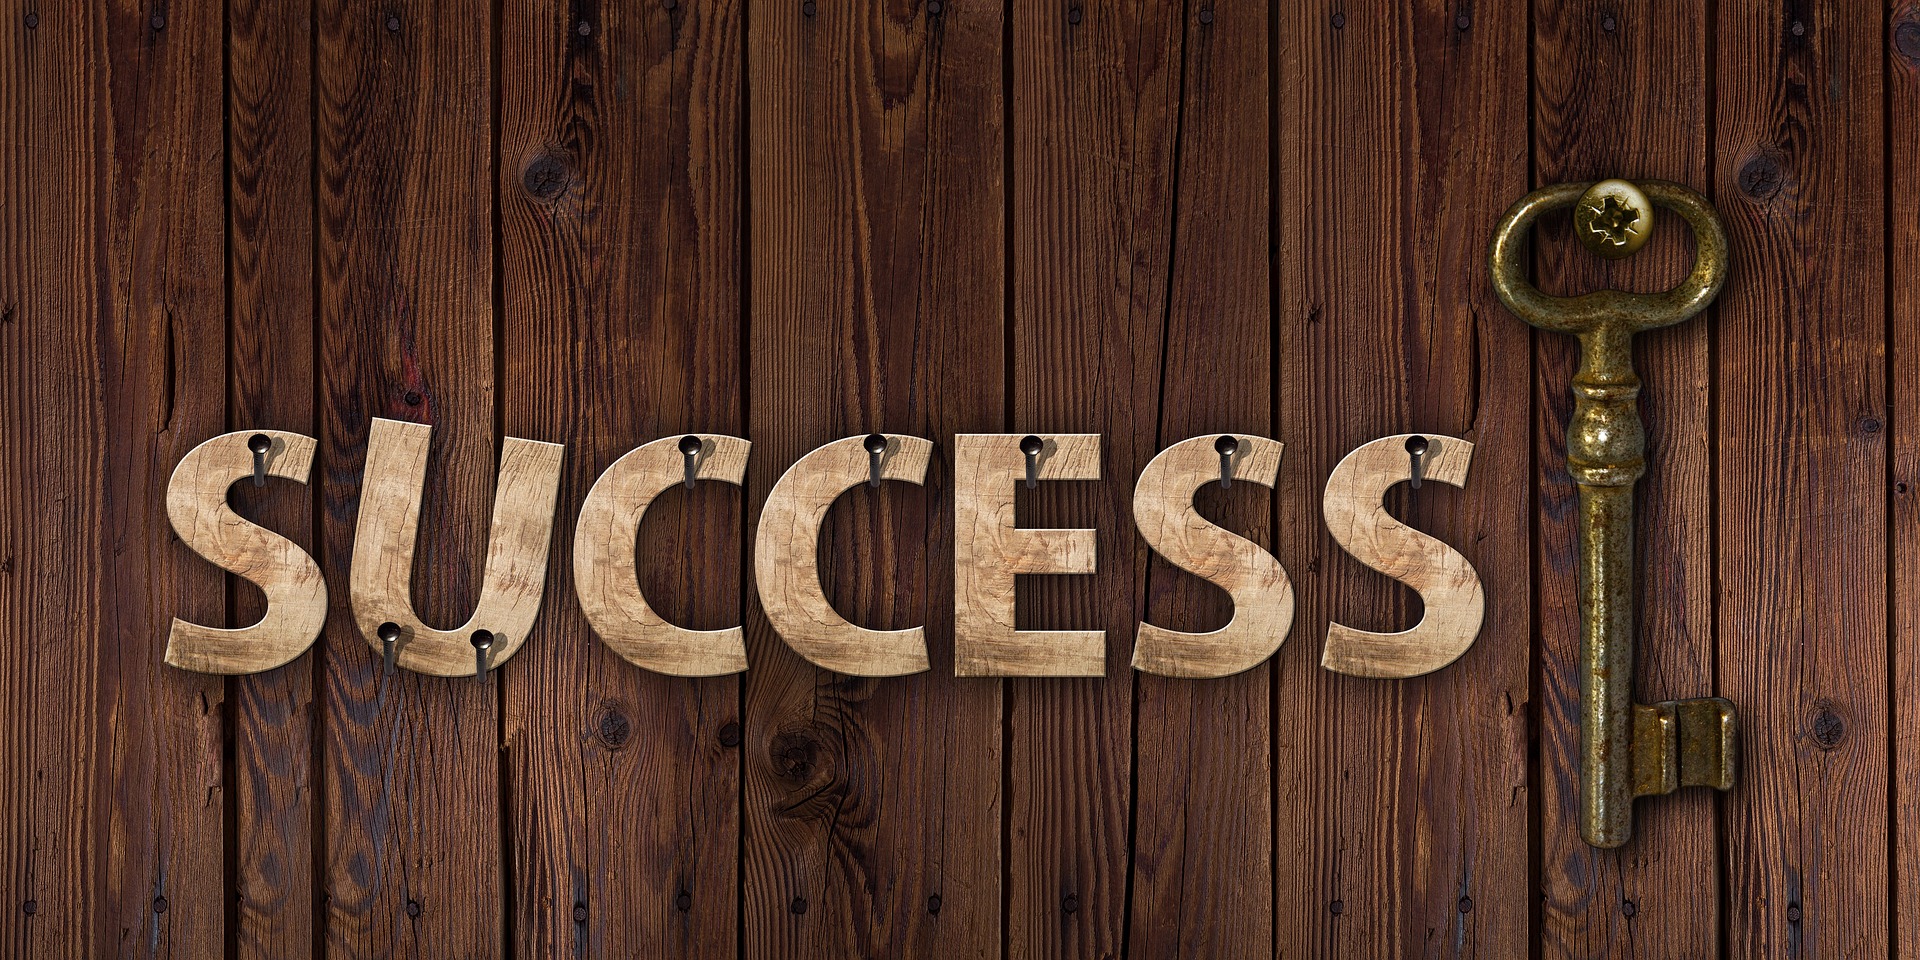 Success with key success wood cut out on key rings with wood in background old metal key